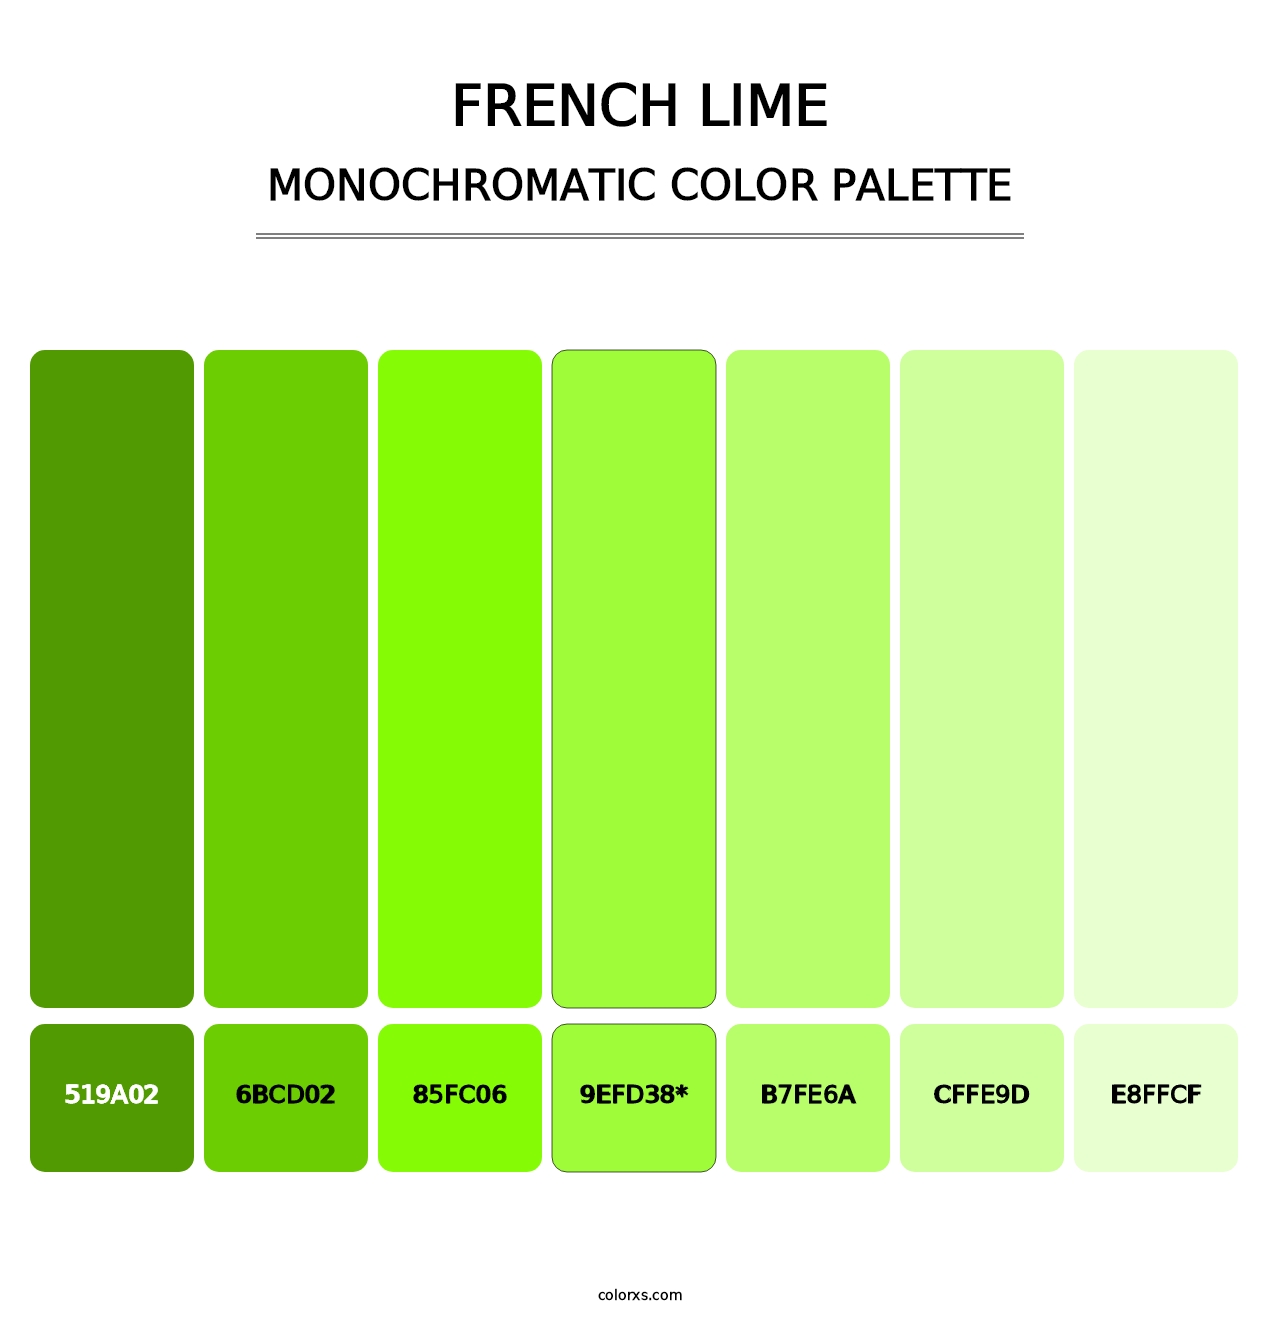 French Lime - Monochromatic Color Palette